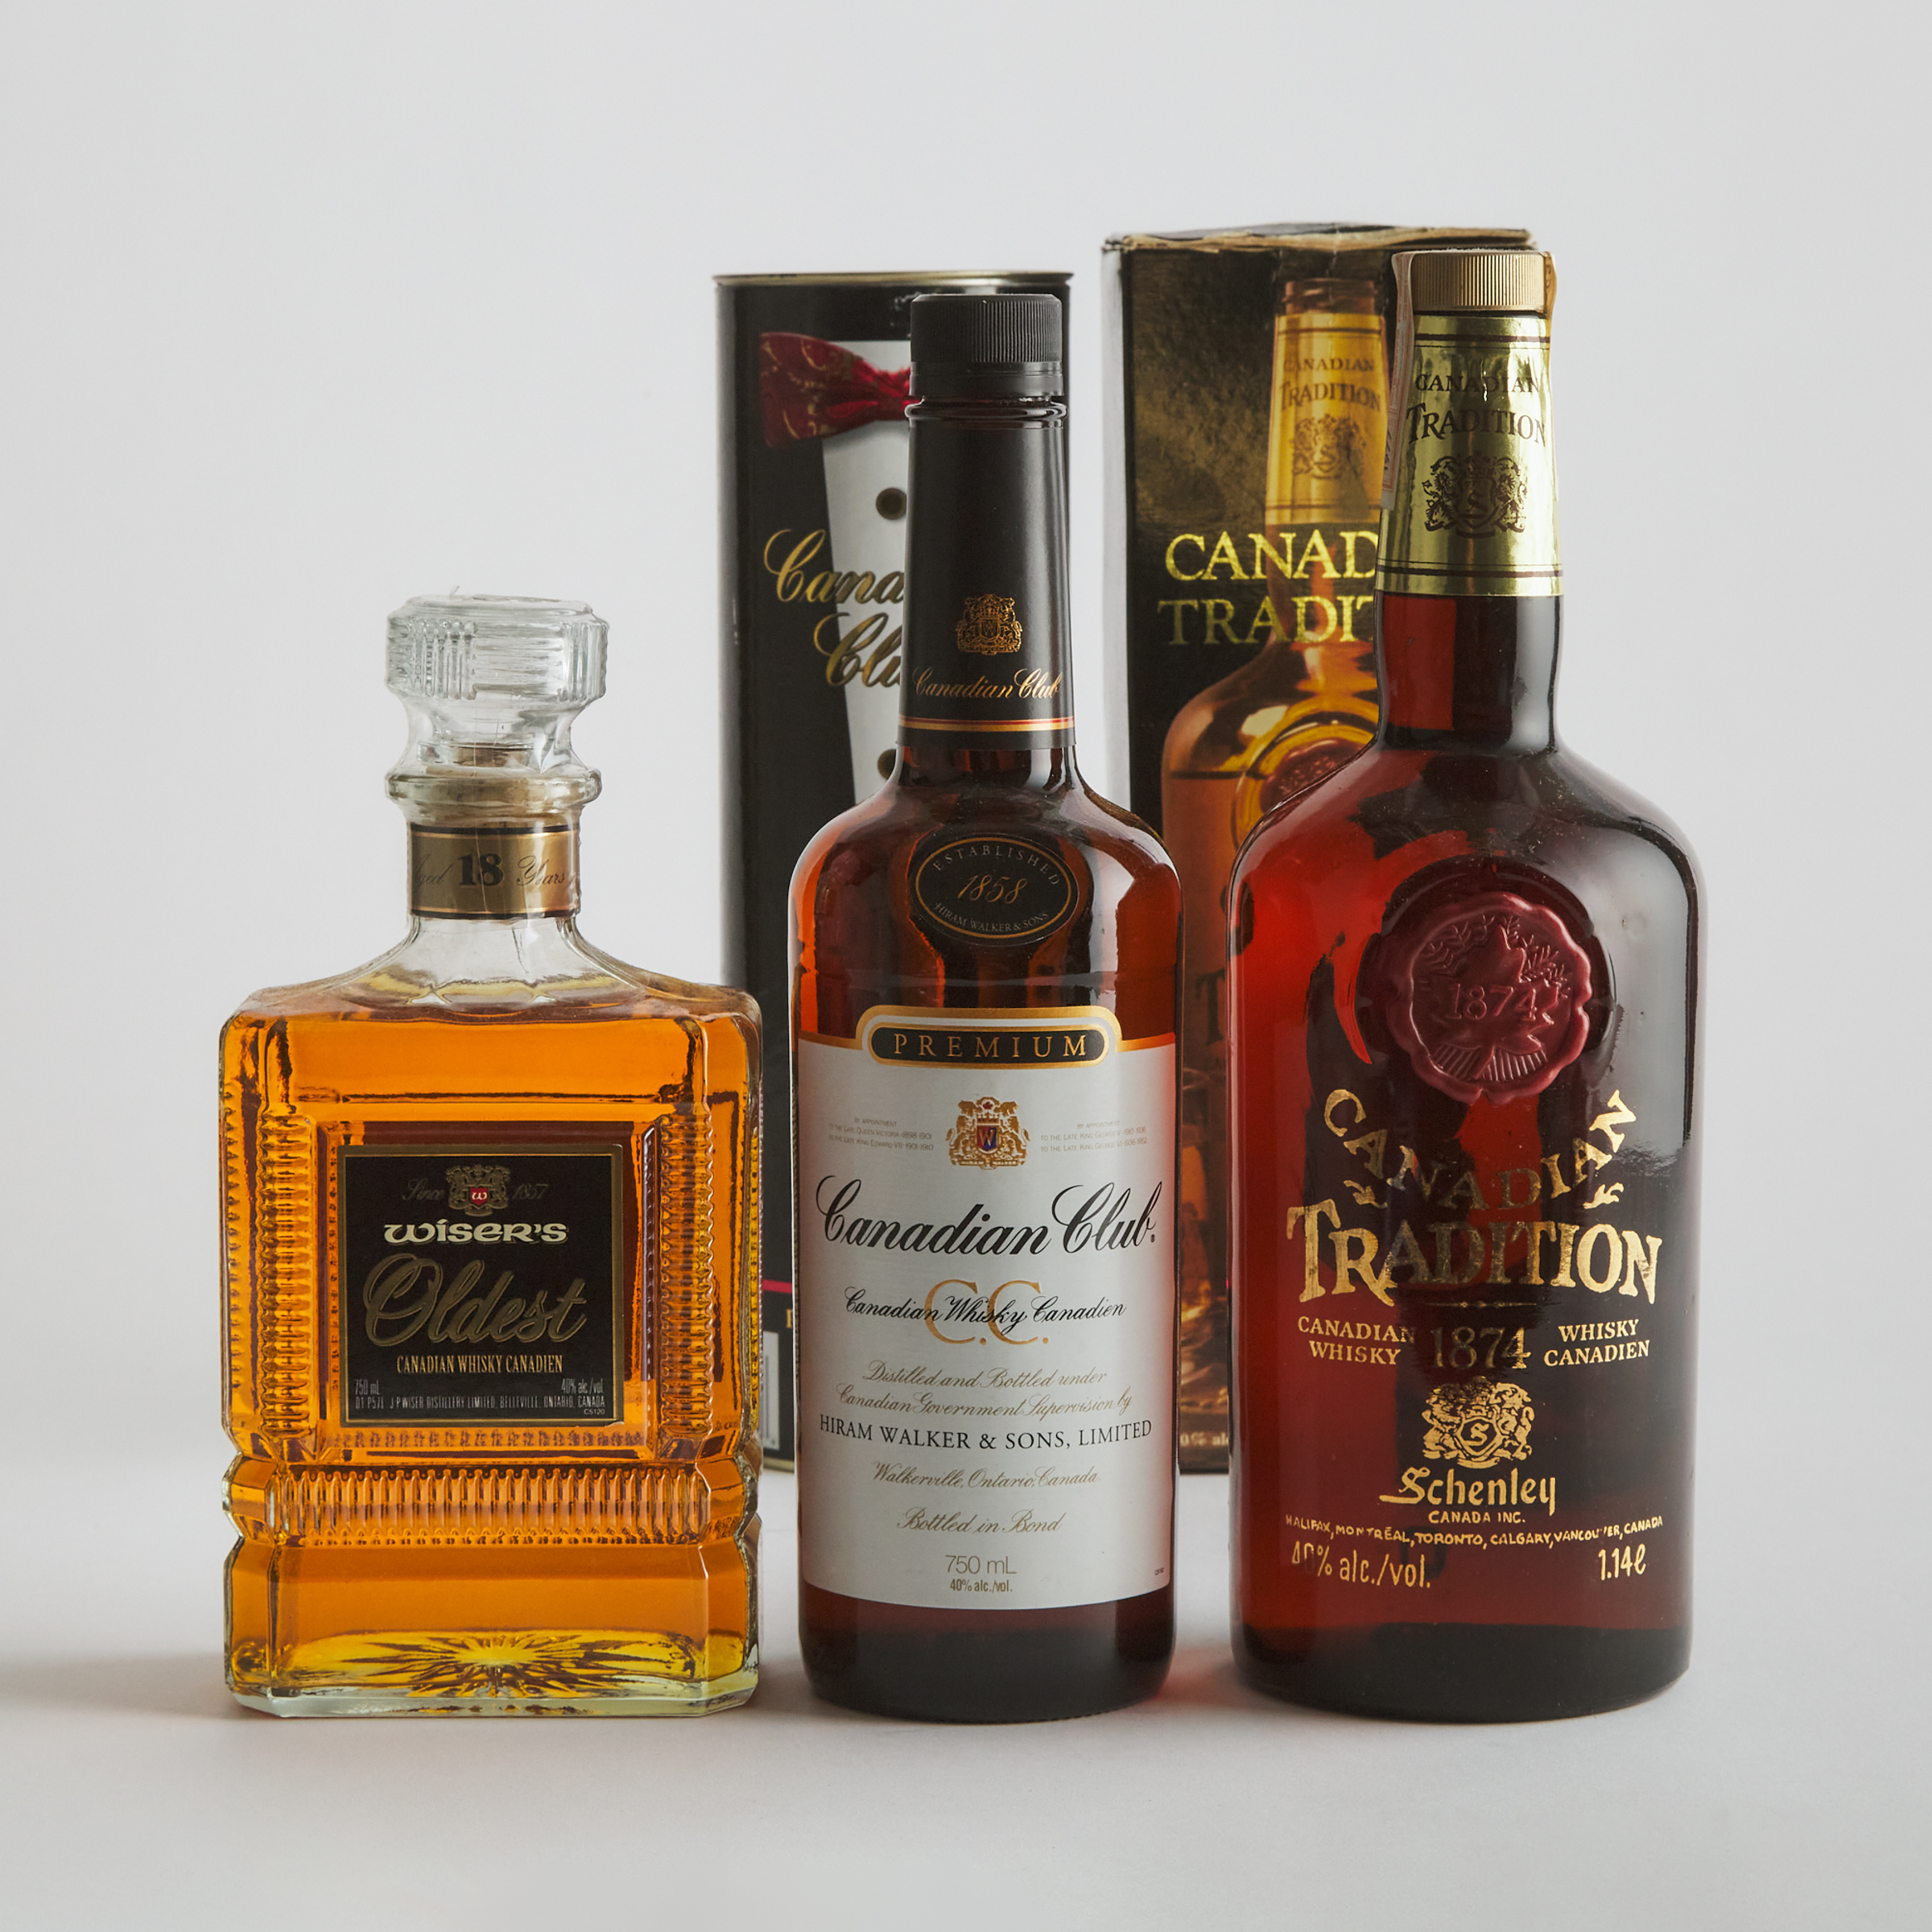 CANADIAN CLUB CANADIAN WHISKY NAS (ONE 750 ML)
SCHENLEY CANADIAN TRADITION CANADIAN WHISKY NAS (ONE 1140 ML)
WISER'S OLDEST CANADIAN WHISKY 18 YEARS (ONE 750 ML)